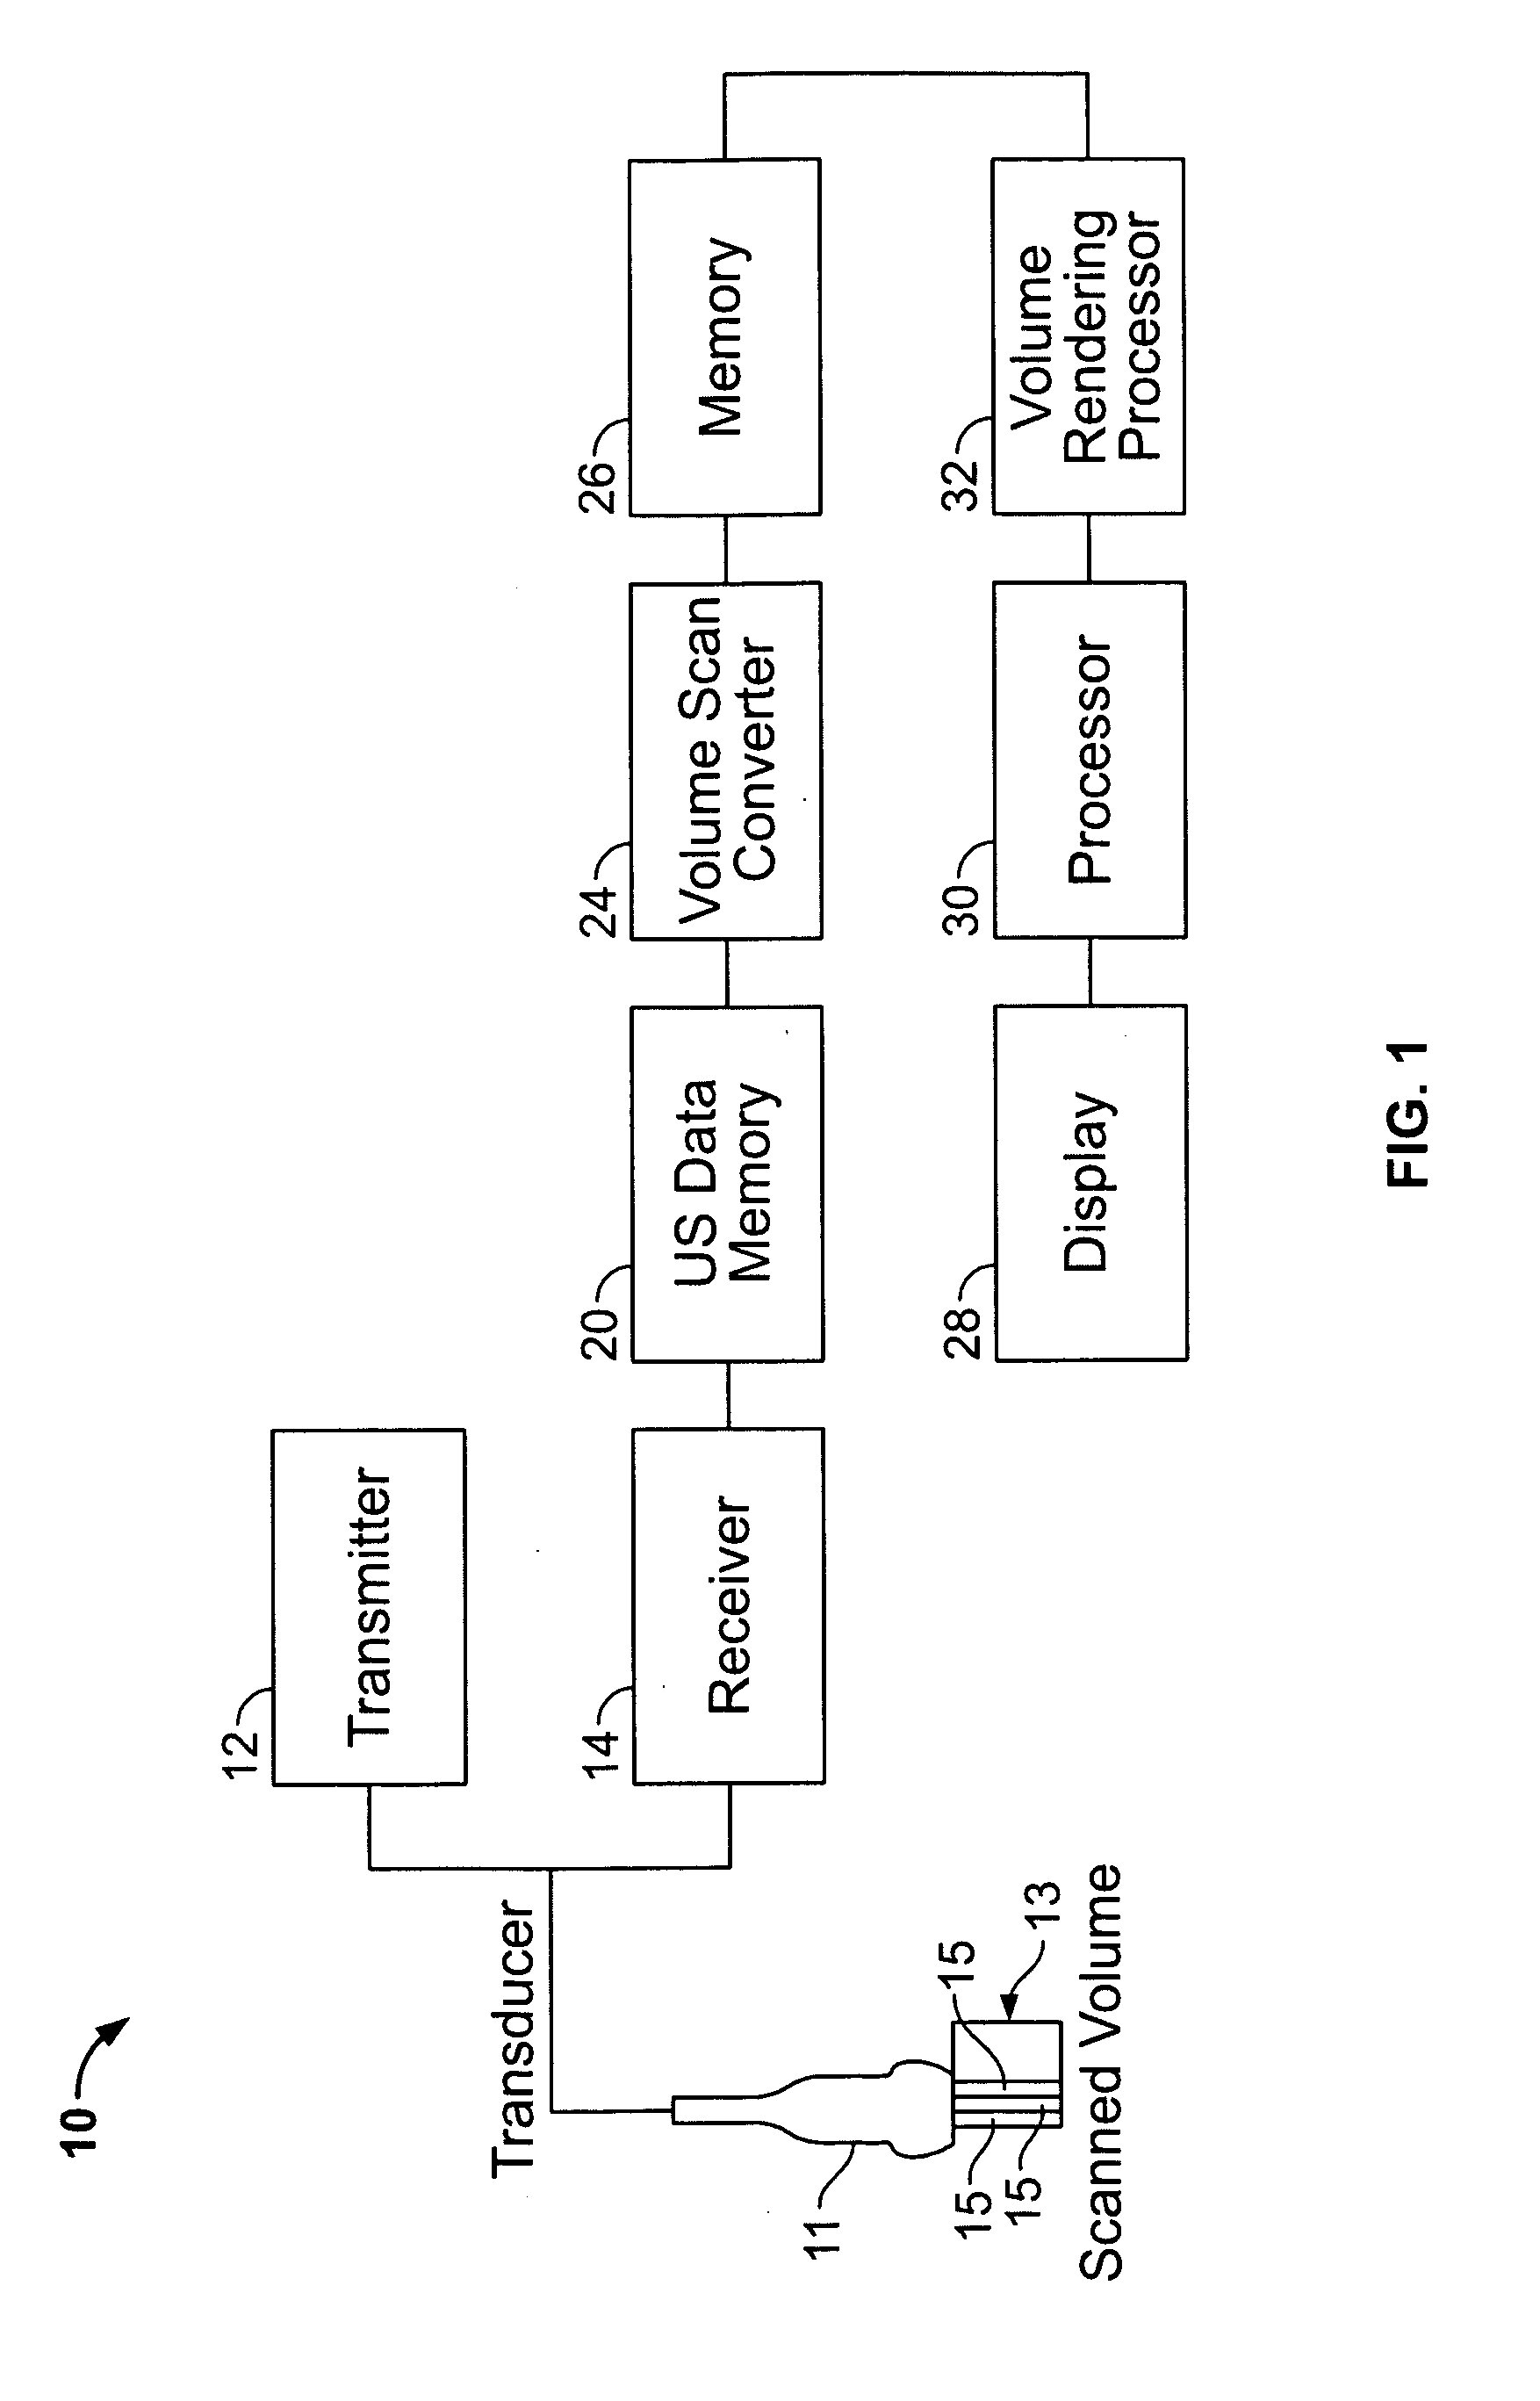 Ultrasound beamformer with high speed serial control bus packetized protocol